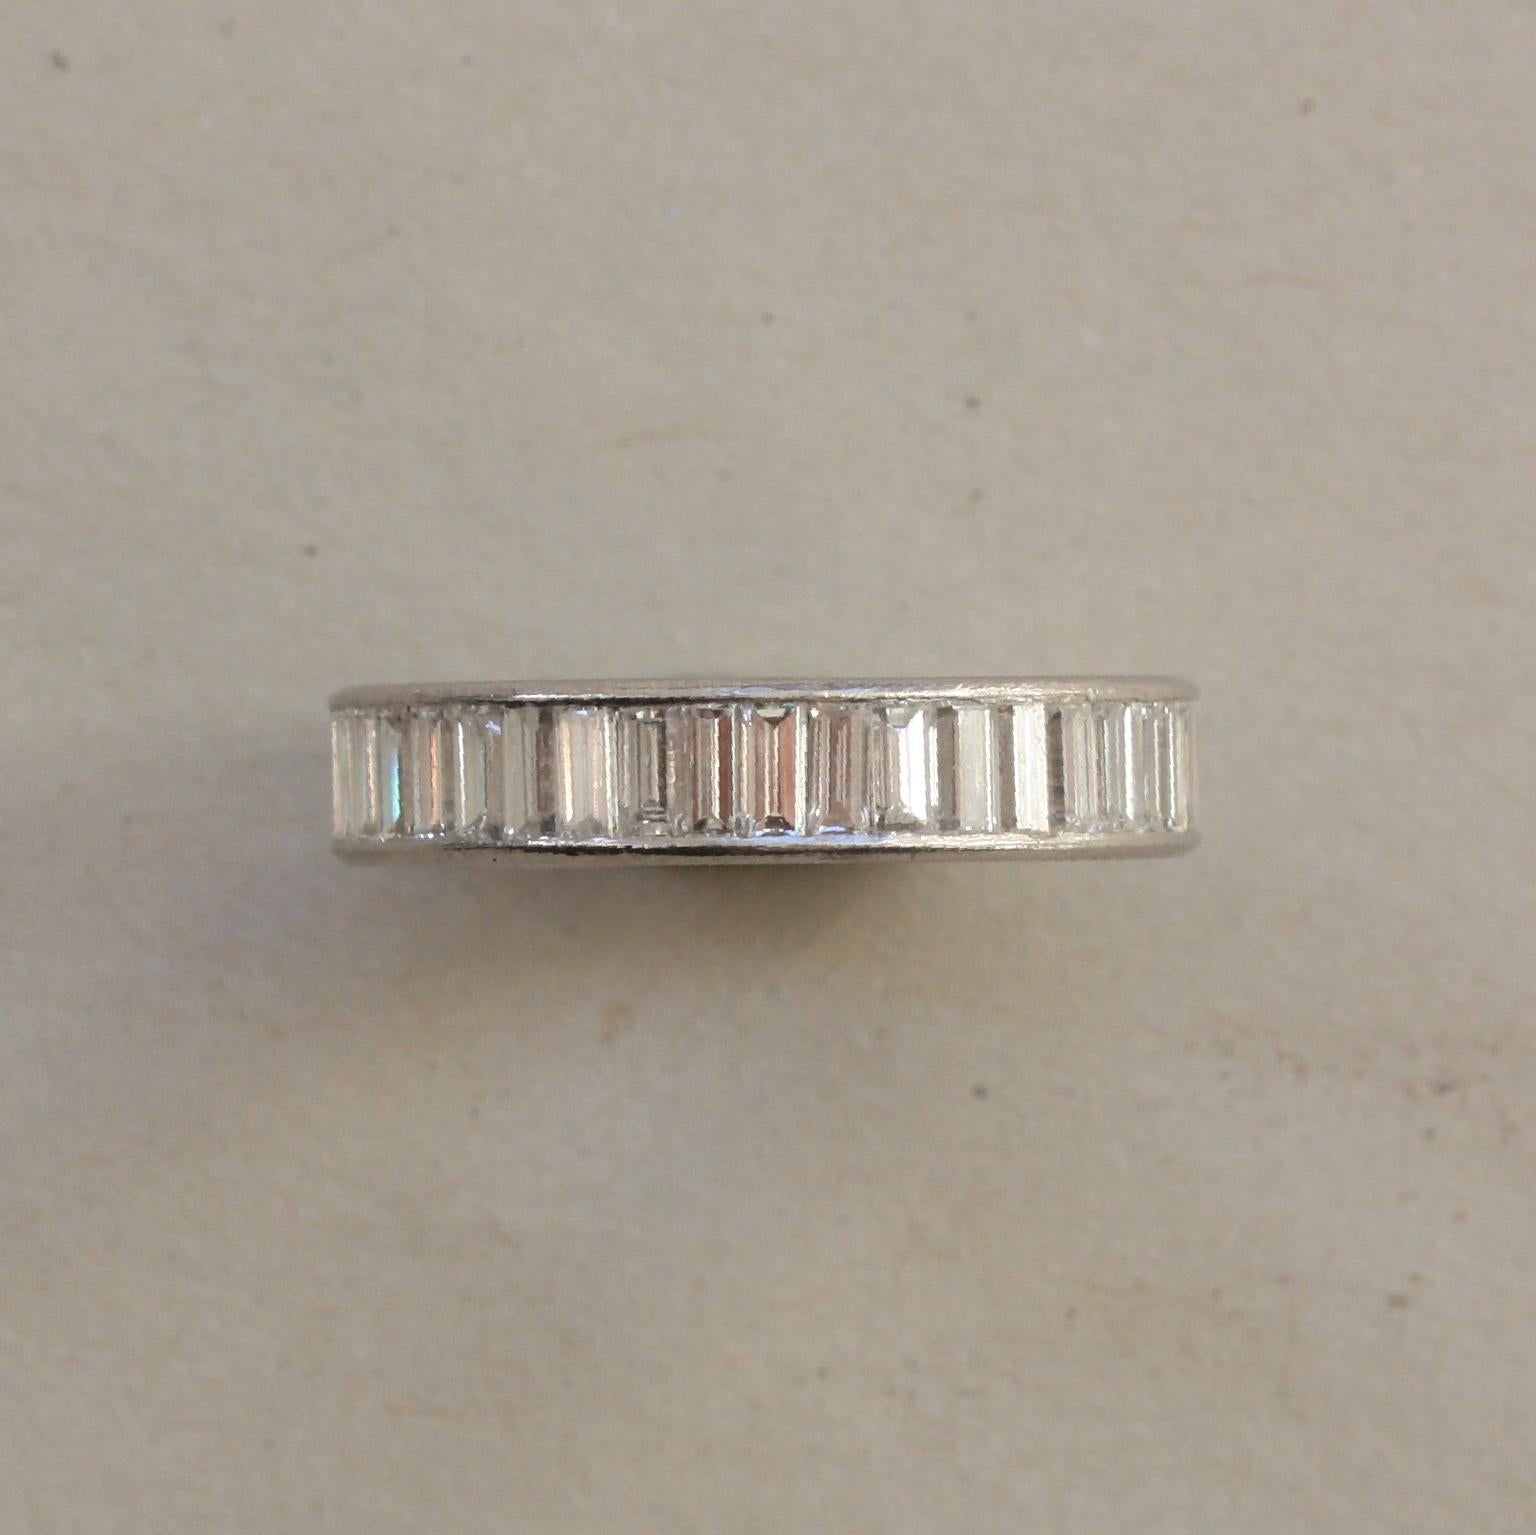 A platinum band ring set with baguette cut diamonds, (each circa 0.07 carat, app. 3.08 carat in total), vertically set, American, circa 1950 and numbered: CJ 551.

ring size: 17 mm. 6.5 US
weight: 4.58 grams
width: 4 mm